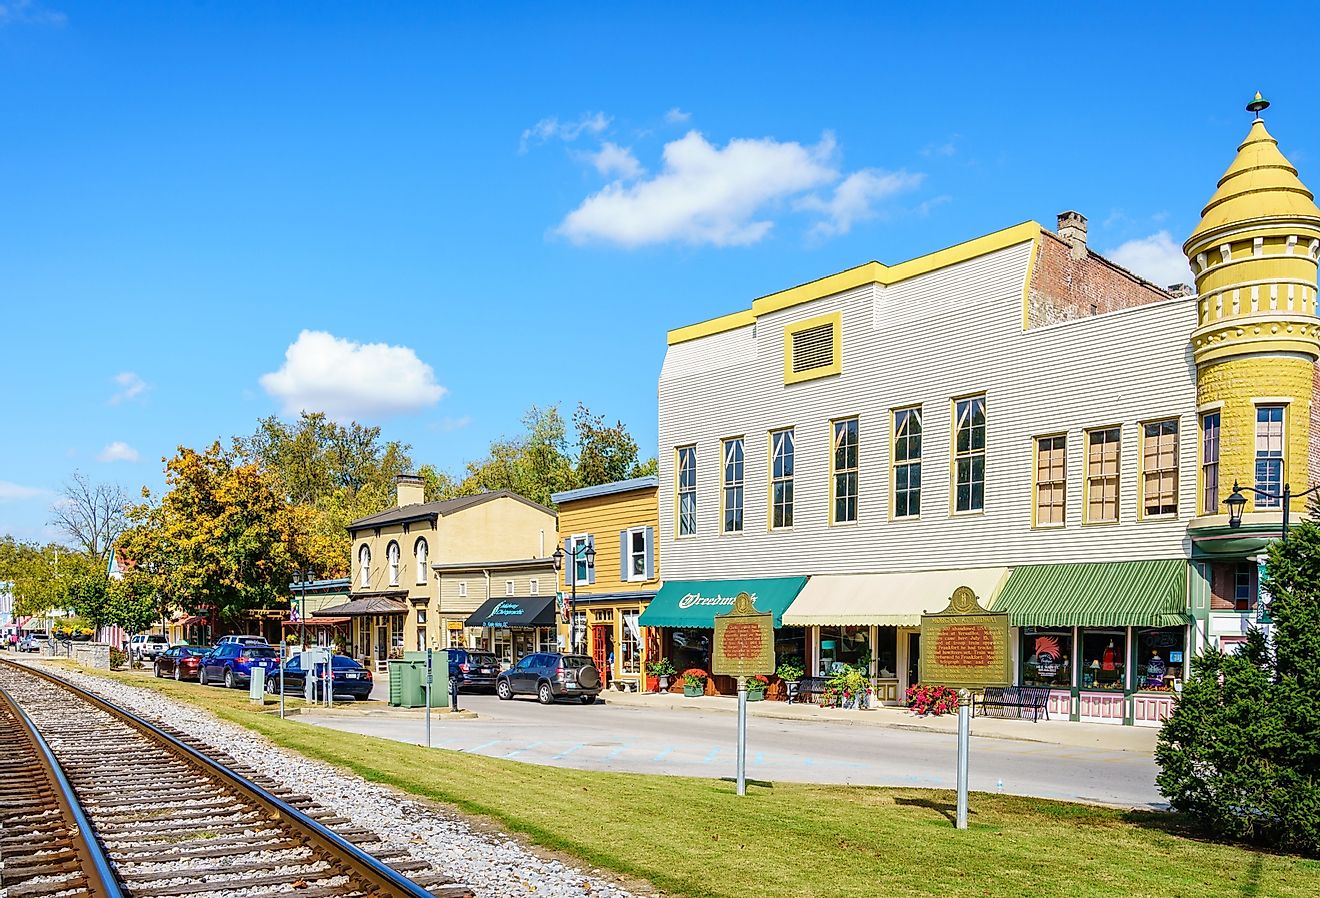 Main Street of Midway: a small town in Central Kentucky. Image credit Alexey Stiop via Shutterstock.